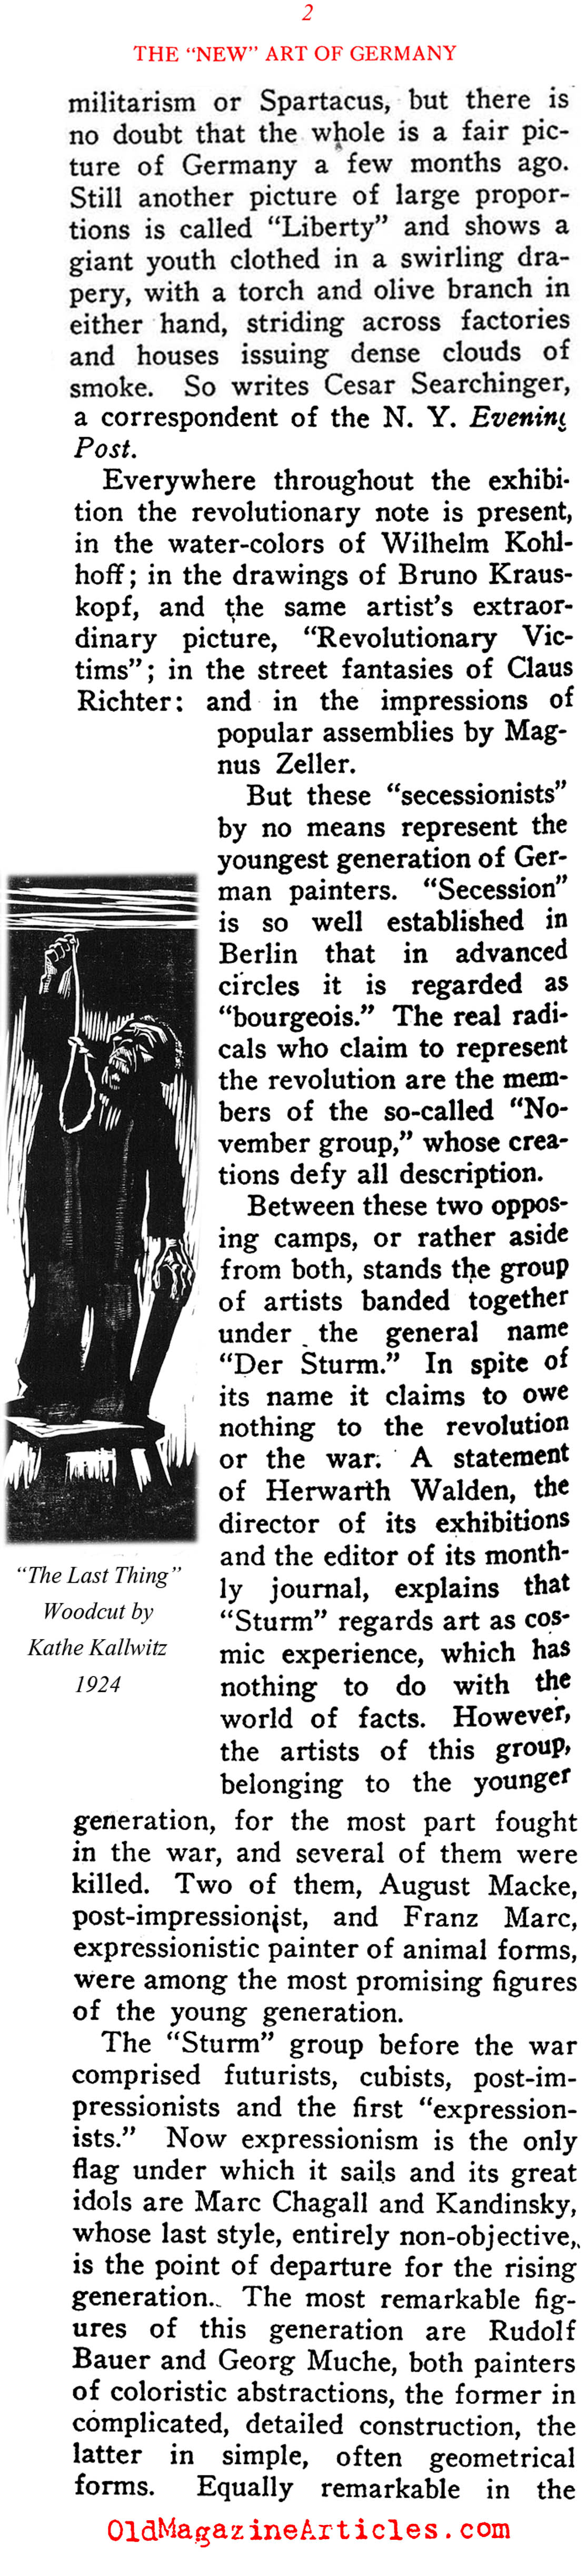 The New Objectivity (Current Opinion, 1919)